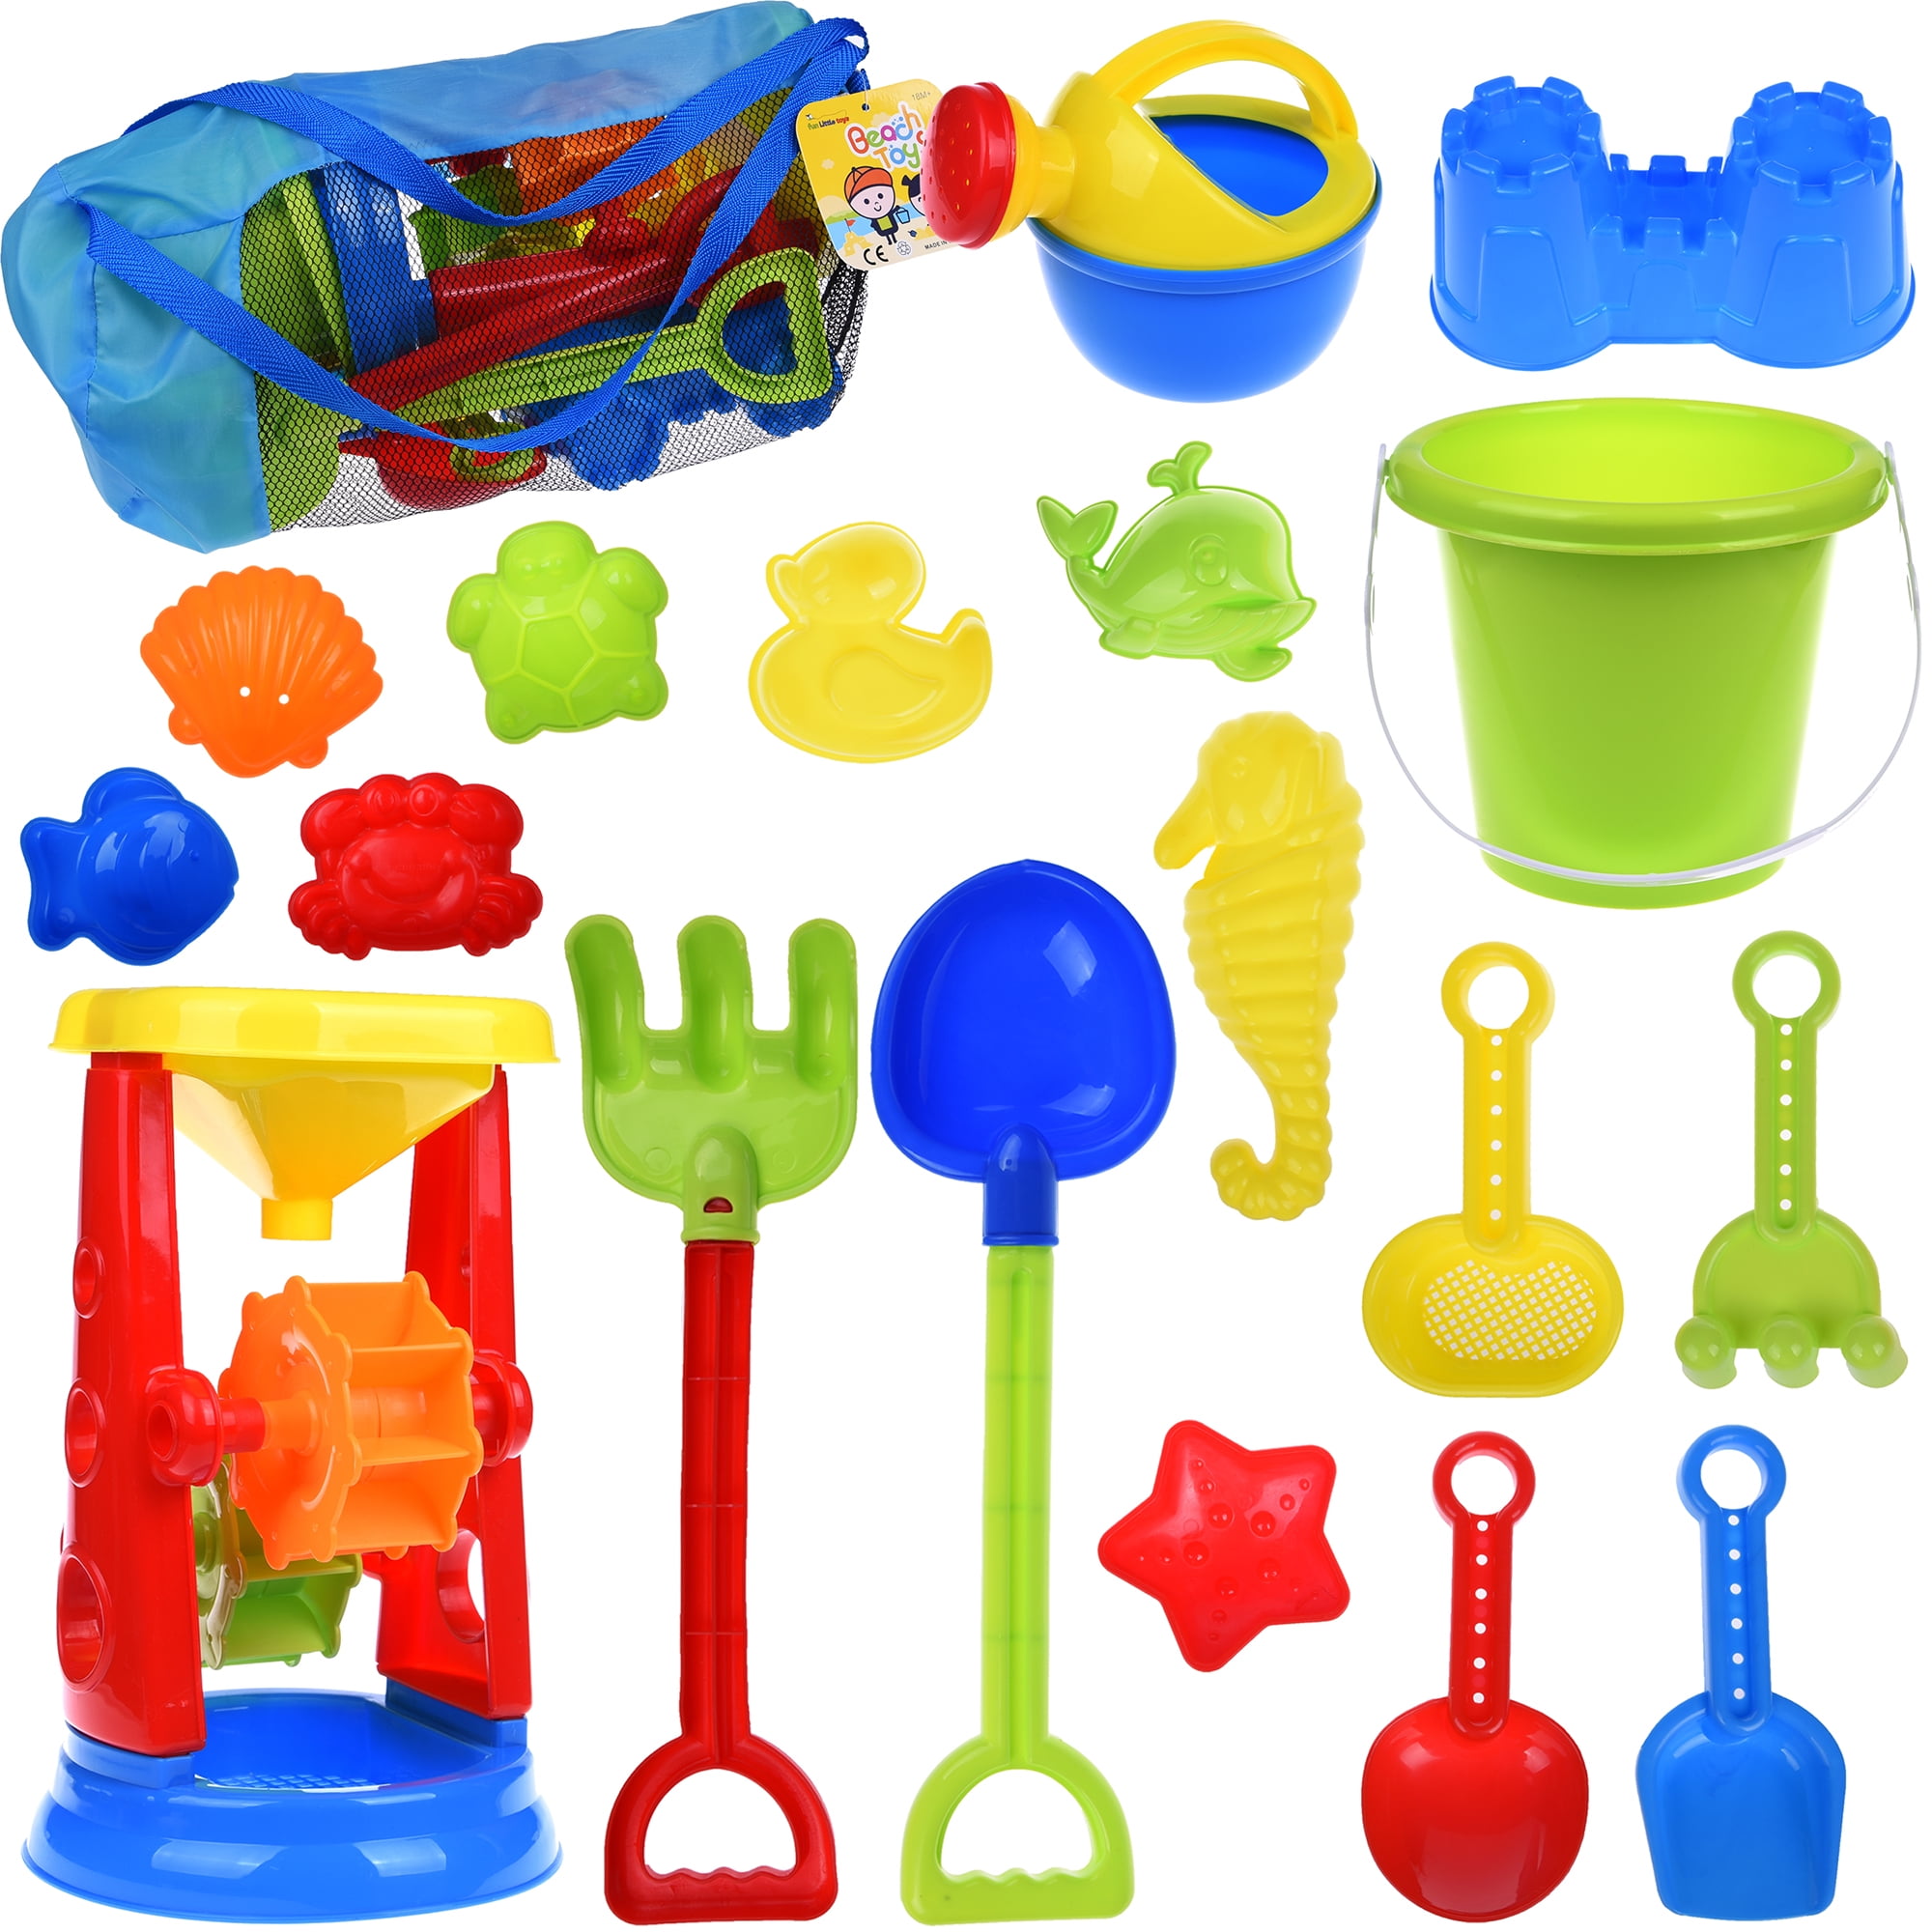 Beach Toys Set for Kids Toddlers 13pcs Beach Sand Toy Set Including Sand Truck Watering CanBeach Molds Beach Bucket Beach Shovel Tool Kit Sandbox Toys Toddlers 